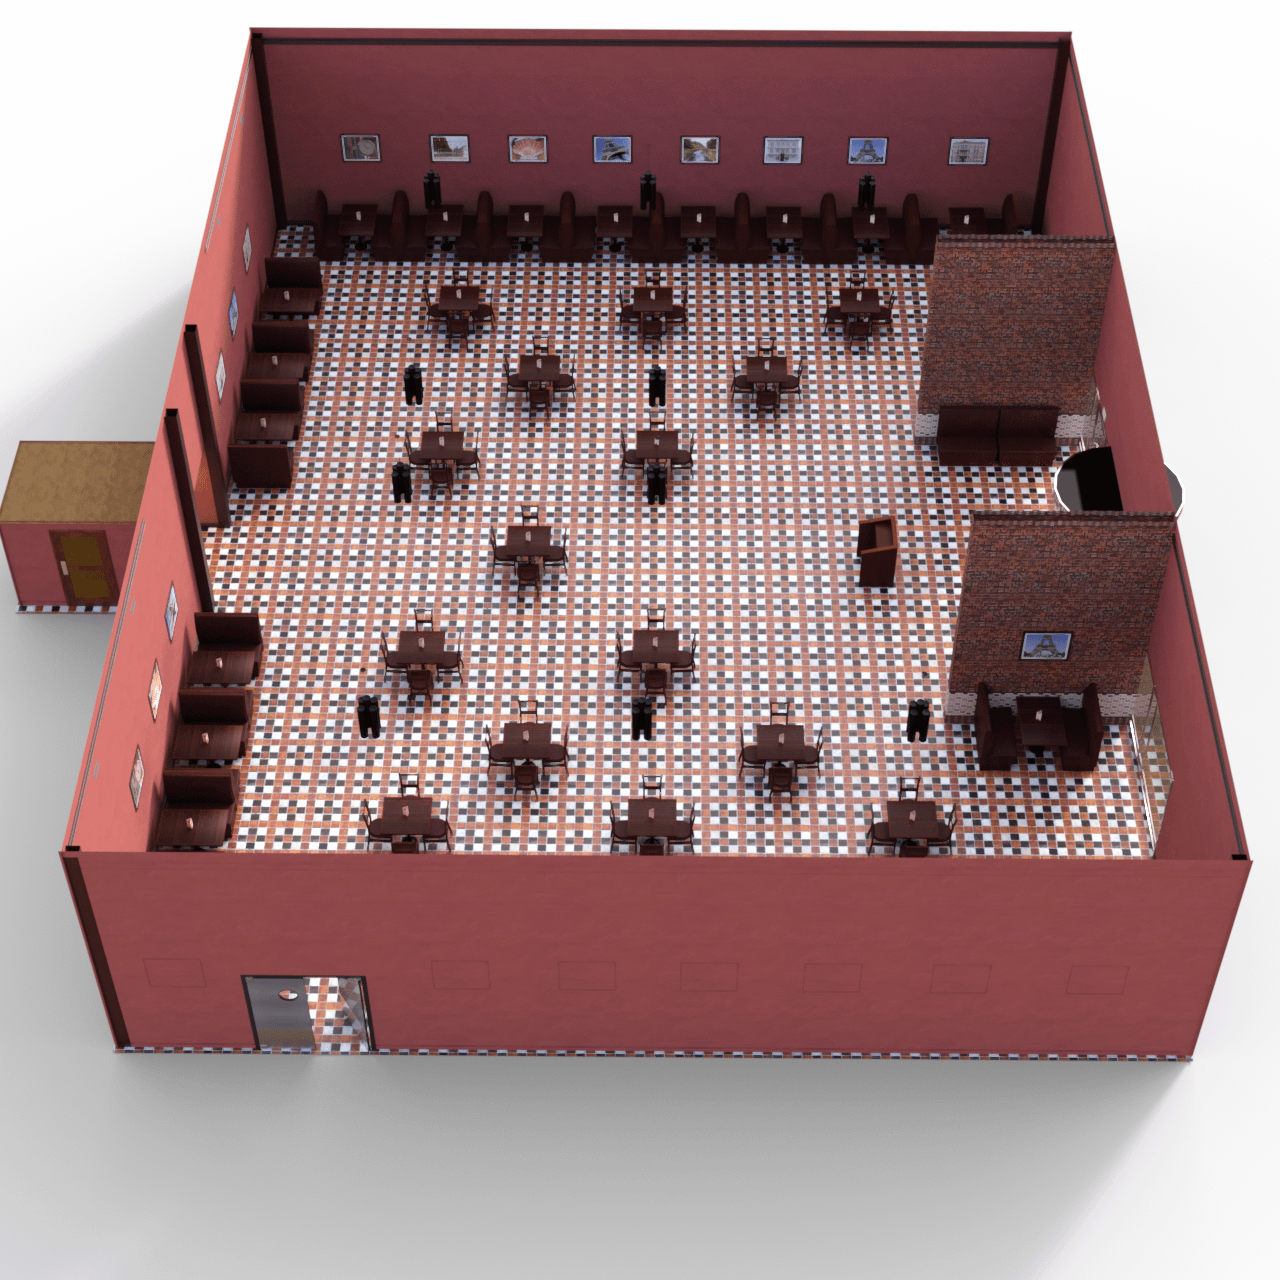 Top overview showing the interior of this restaurant 3d model